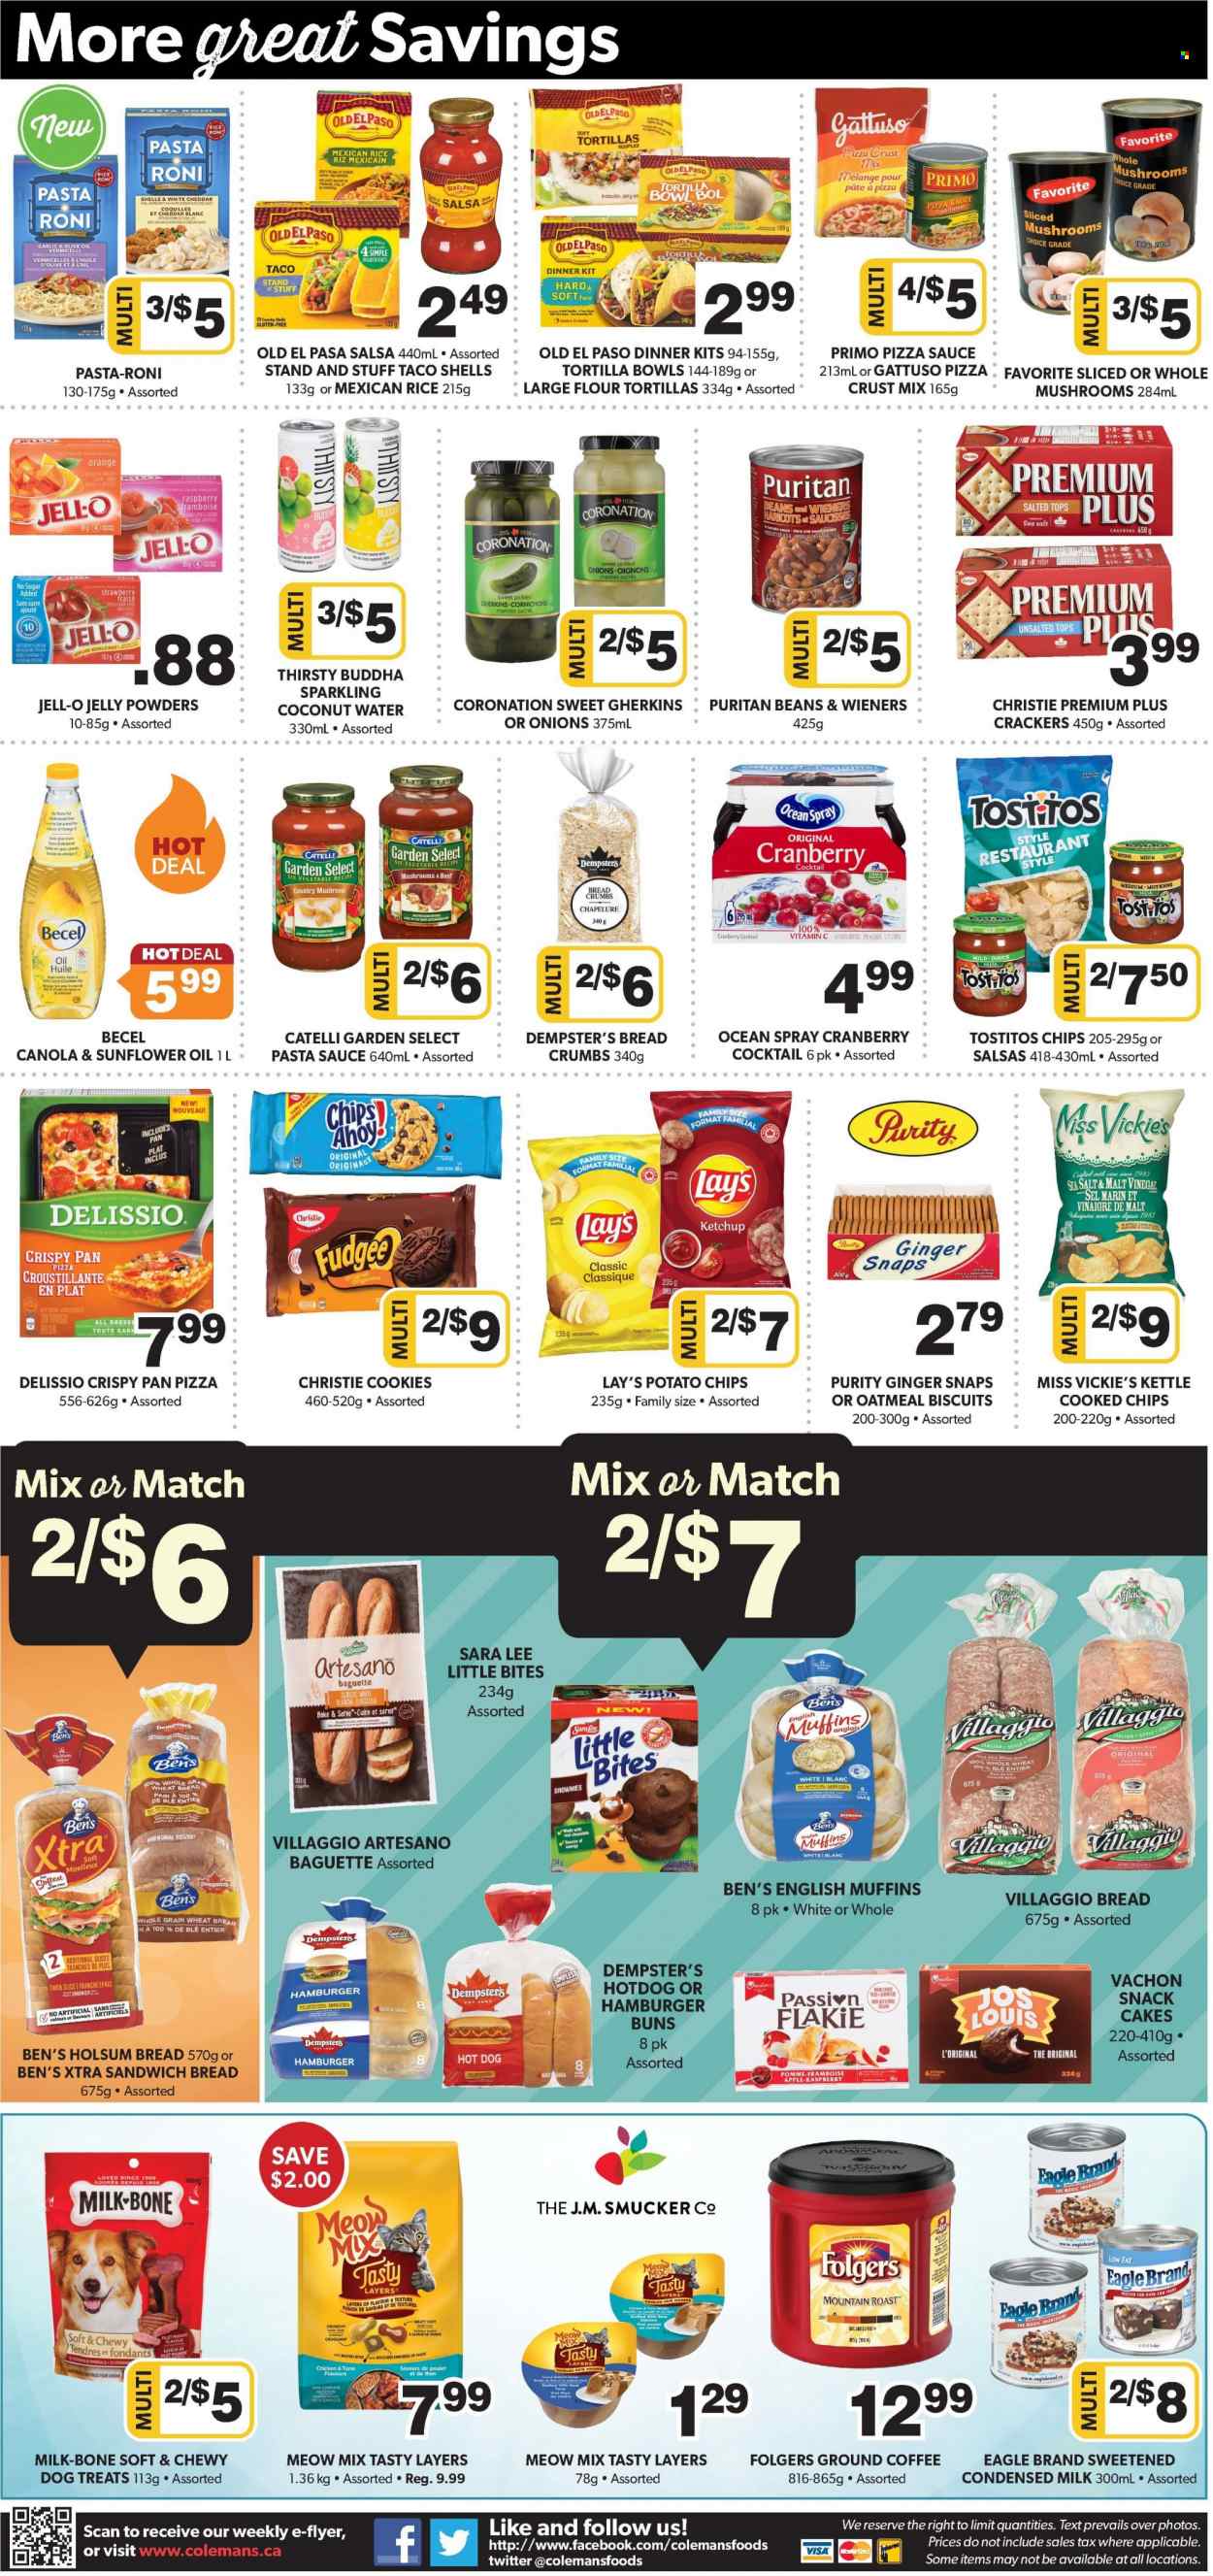 thumbnail - Colemans Flyer - November 24, 2022 - November 30, 2022 - Sales products - baguette, english muffins, tortillas, hot dog rolls, Old El Paso, burger buns, tacos, Sara Lee, flour tortillas, breadcrumbs, onion, snack, cod, pasta sauce, sauce, dinner kit, pasta sides, frankfurters, pâté, condensed milk, margarine, cookies, jelly, crackers, biscuit, Little Bites, snack cake, potato chips, Lay’s, Tostitos, salty snack, oatmeal, Jell-O, malt, pickled gherkins, pizza sauce, ketchup, salsa, sunflower oil, oil, fruit drink, coconut water, coffee, Folgers, ground coffee, Purity, XTRA, vitamin c. Page 6.